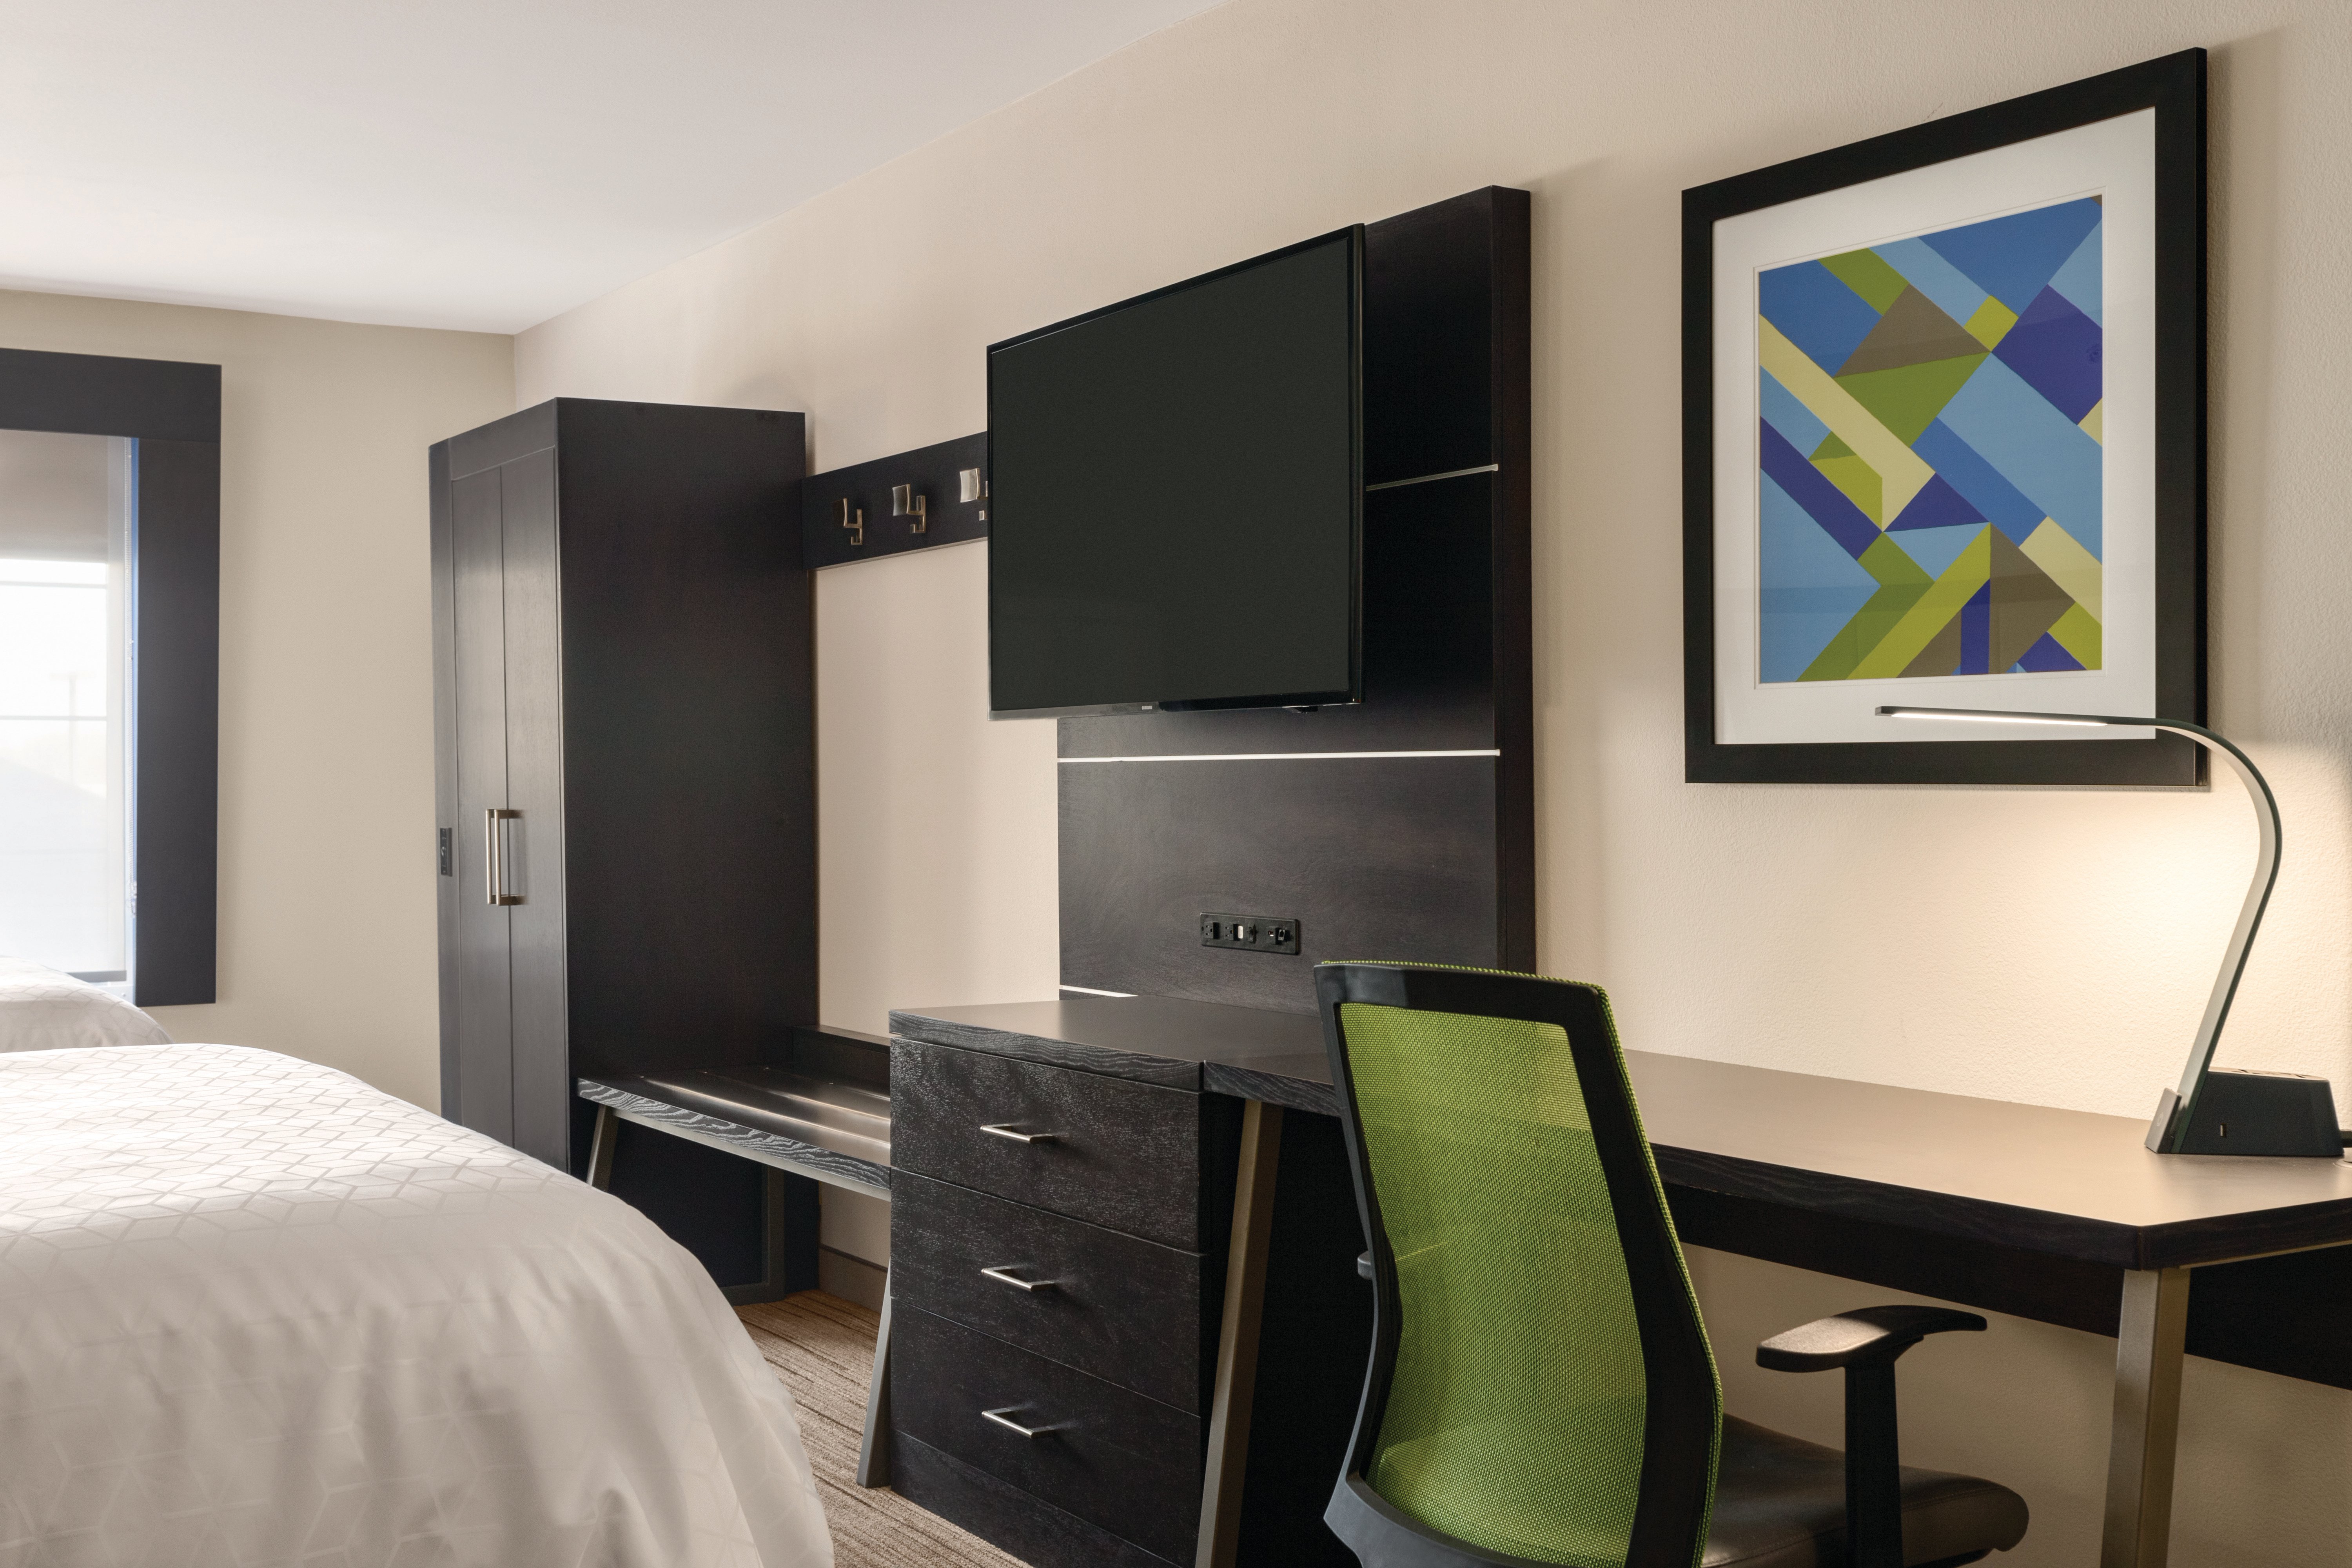 All guestrooms are equipped with a desk